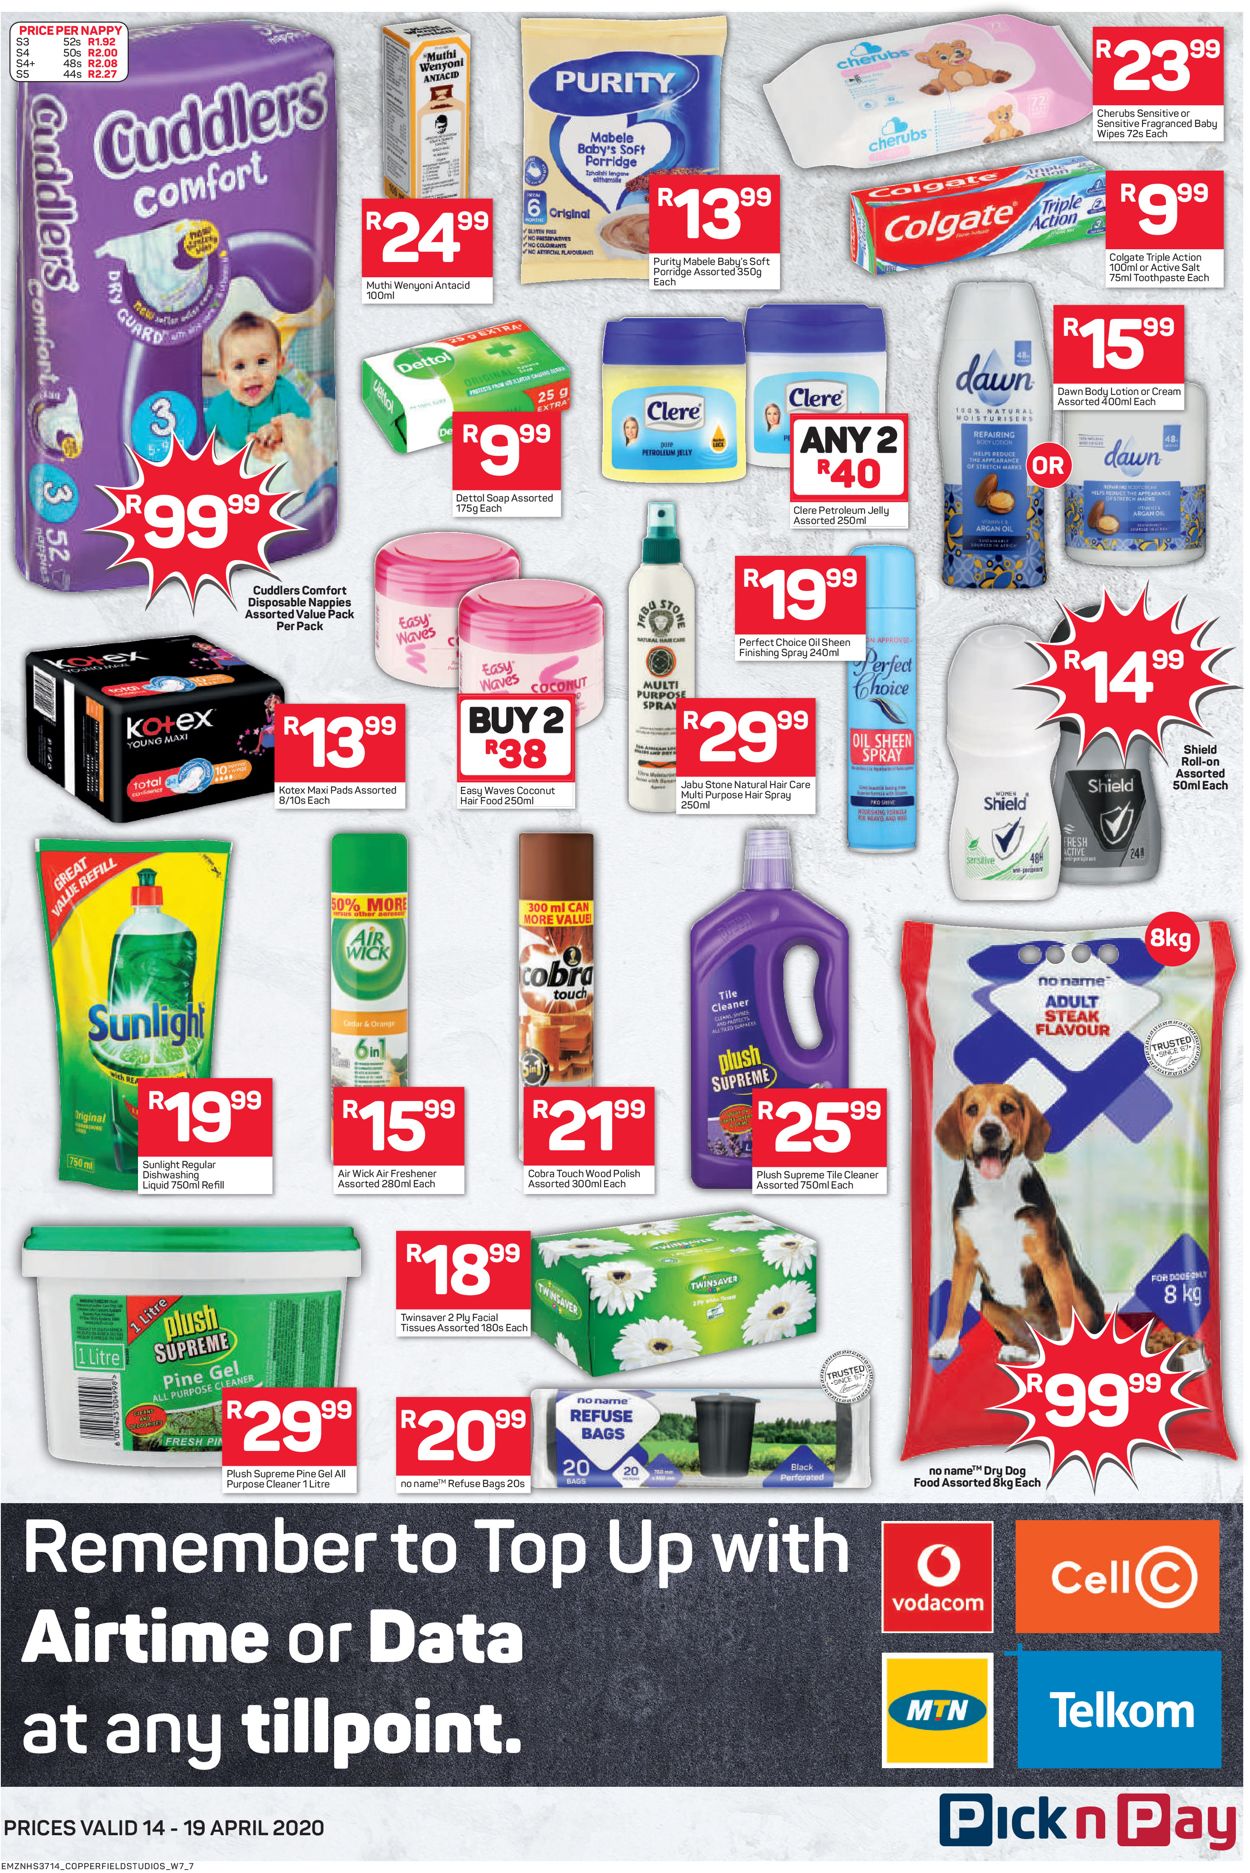 Pick n Pay Catalogue - 2020/04/14-2020/04/19 (Page 7)